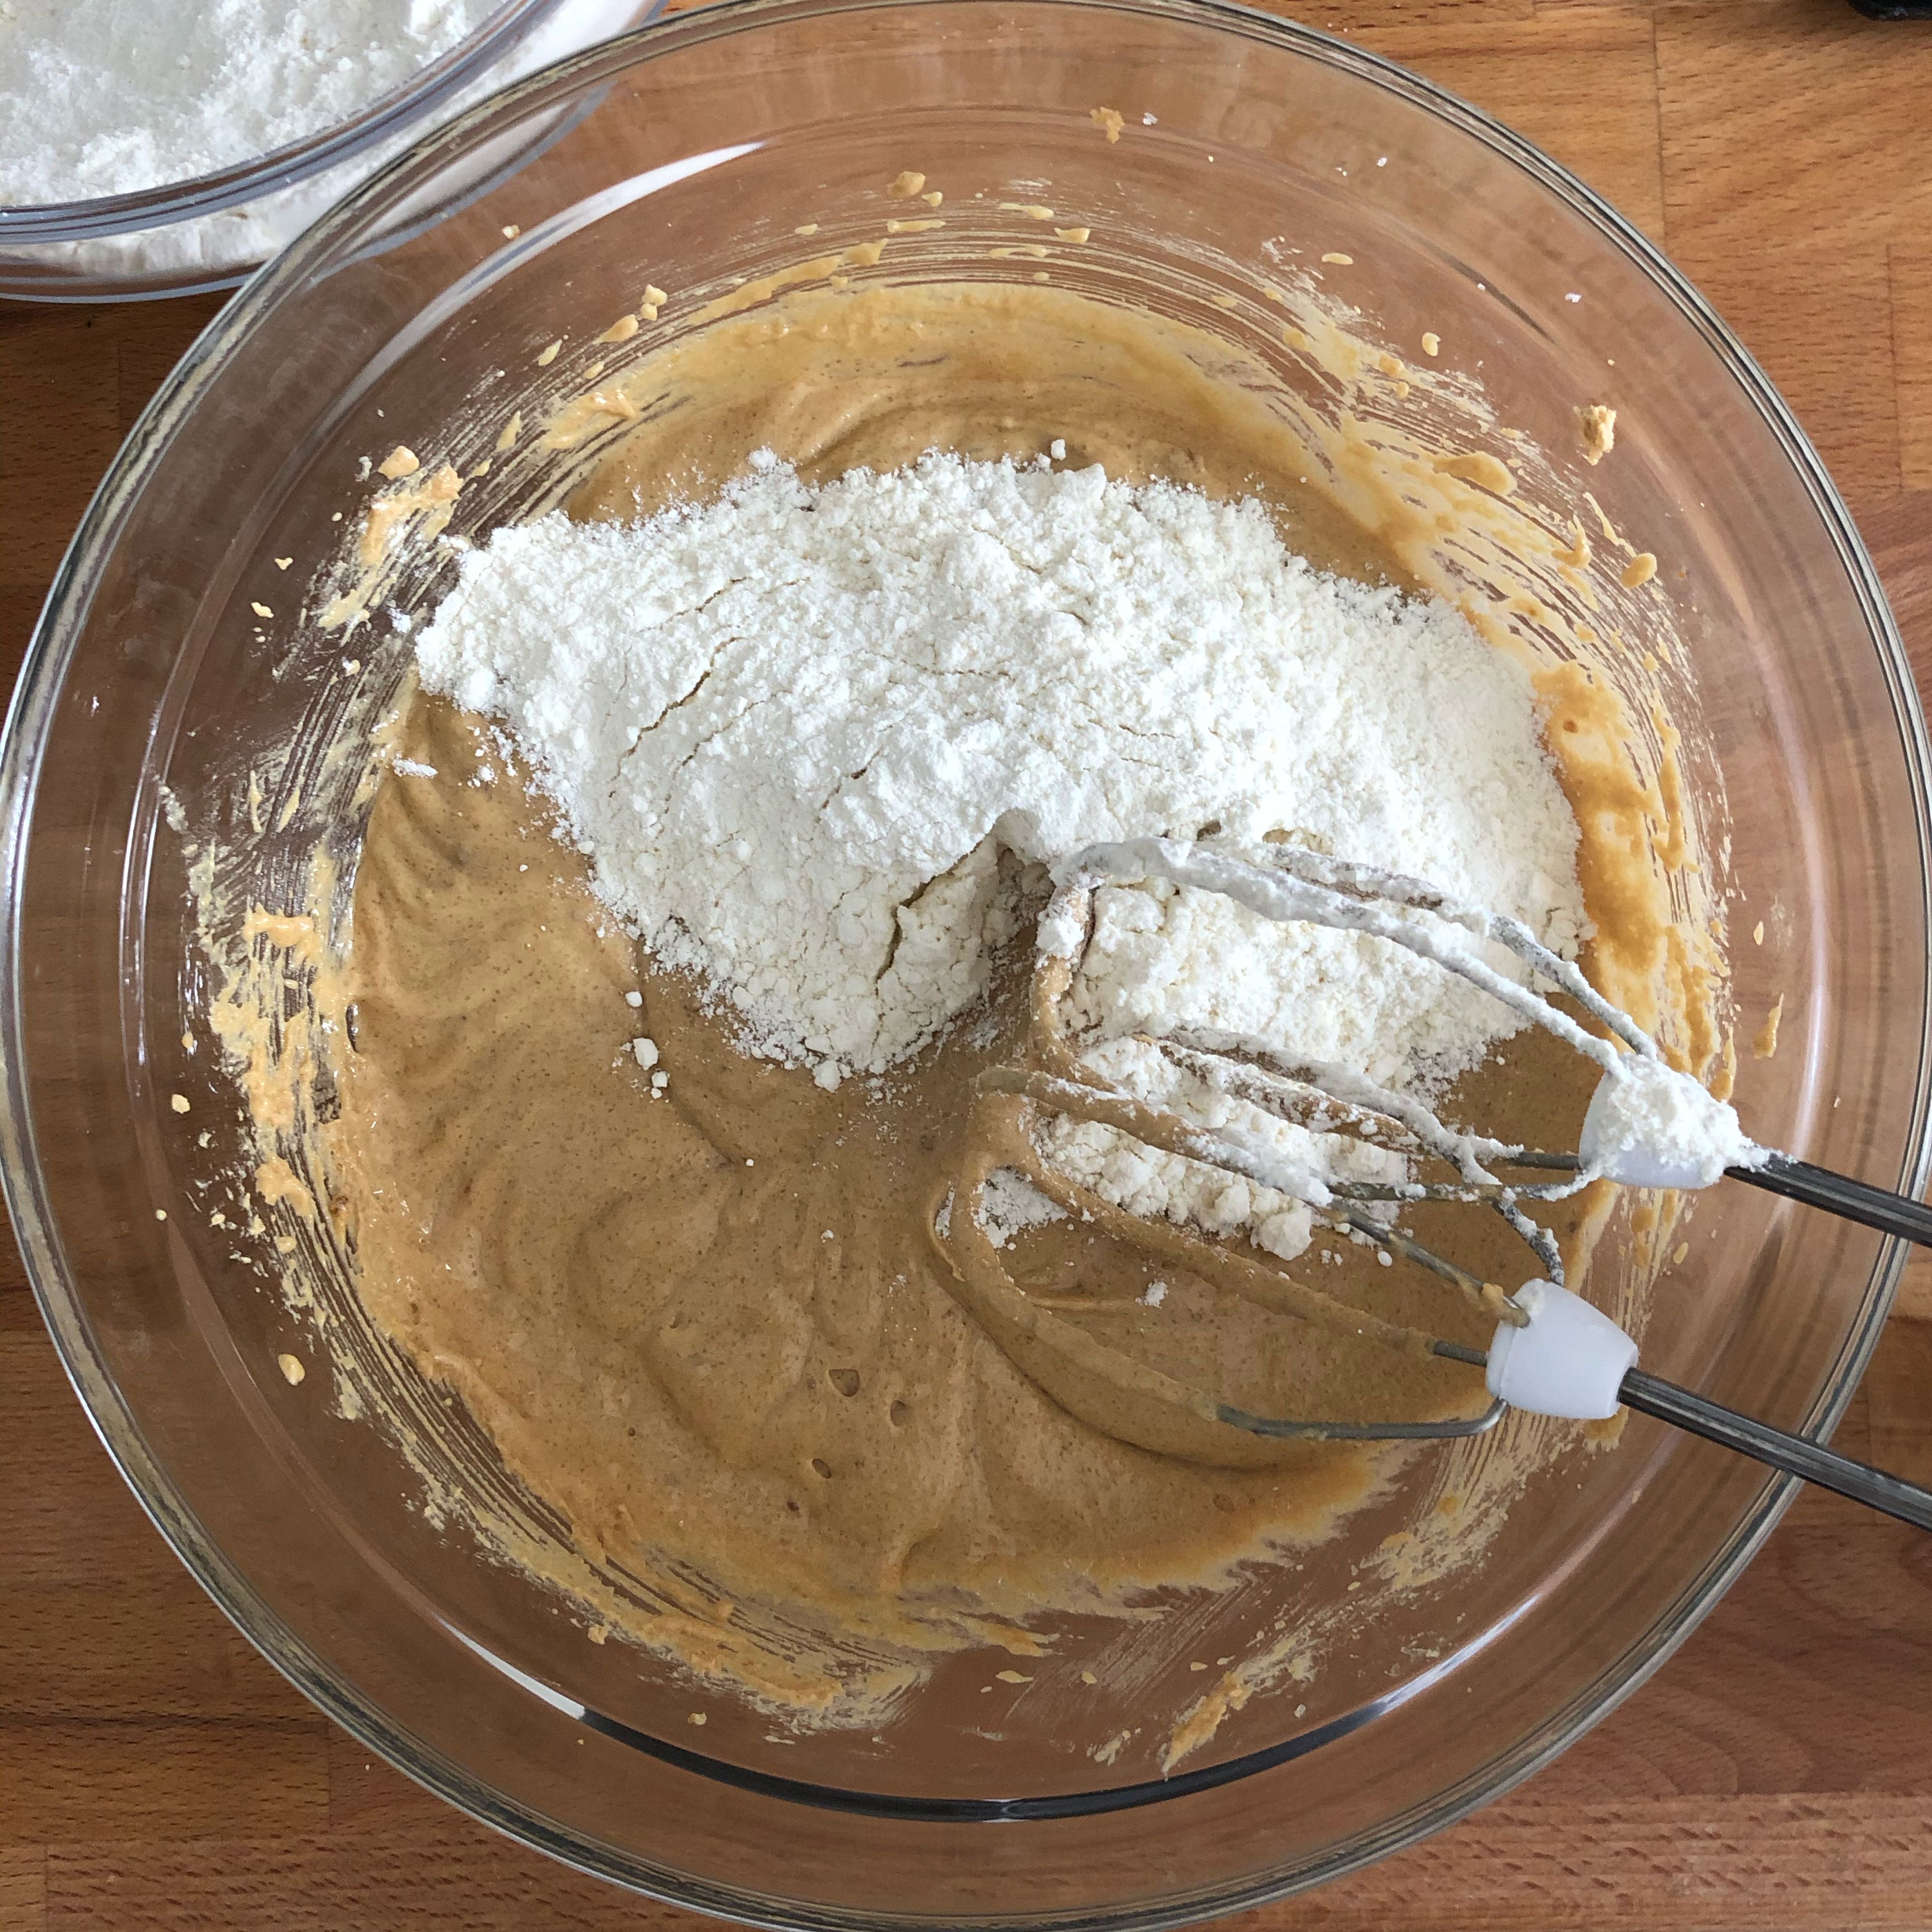 Add miso and tahini to the butter-sugar mixture and mix until combined. Scrape down the sides of the bowl and mix again. Add egg and vanilla and mix just to combine, then add some of the flour mixture and mix in on low speed. Add remaining flour and mix just until combined.